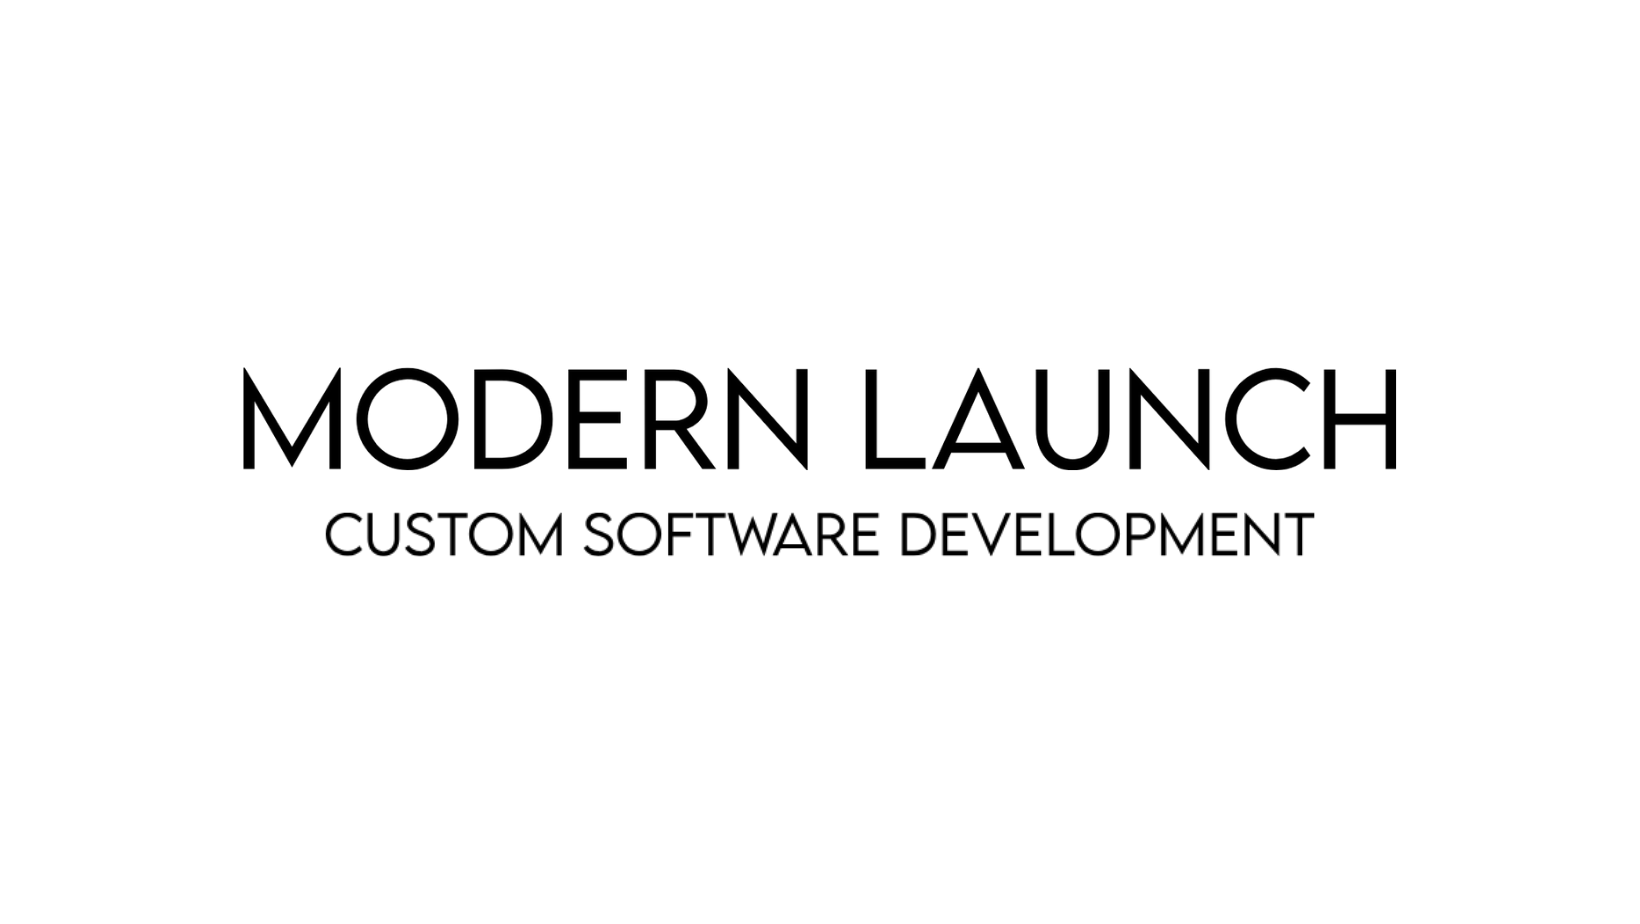 Modern Launch provides the best and most affordable website designer, software design company and app development company in Milford Connecticut.